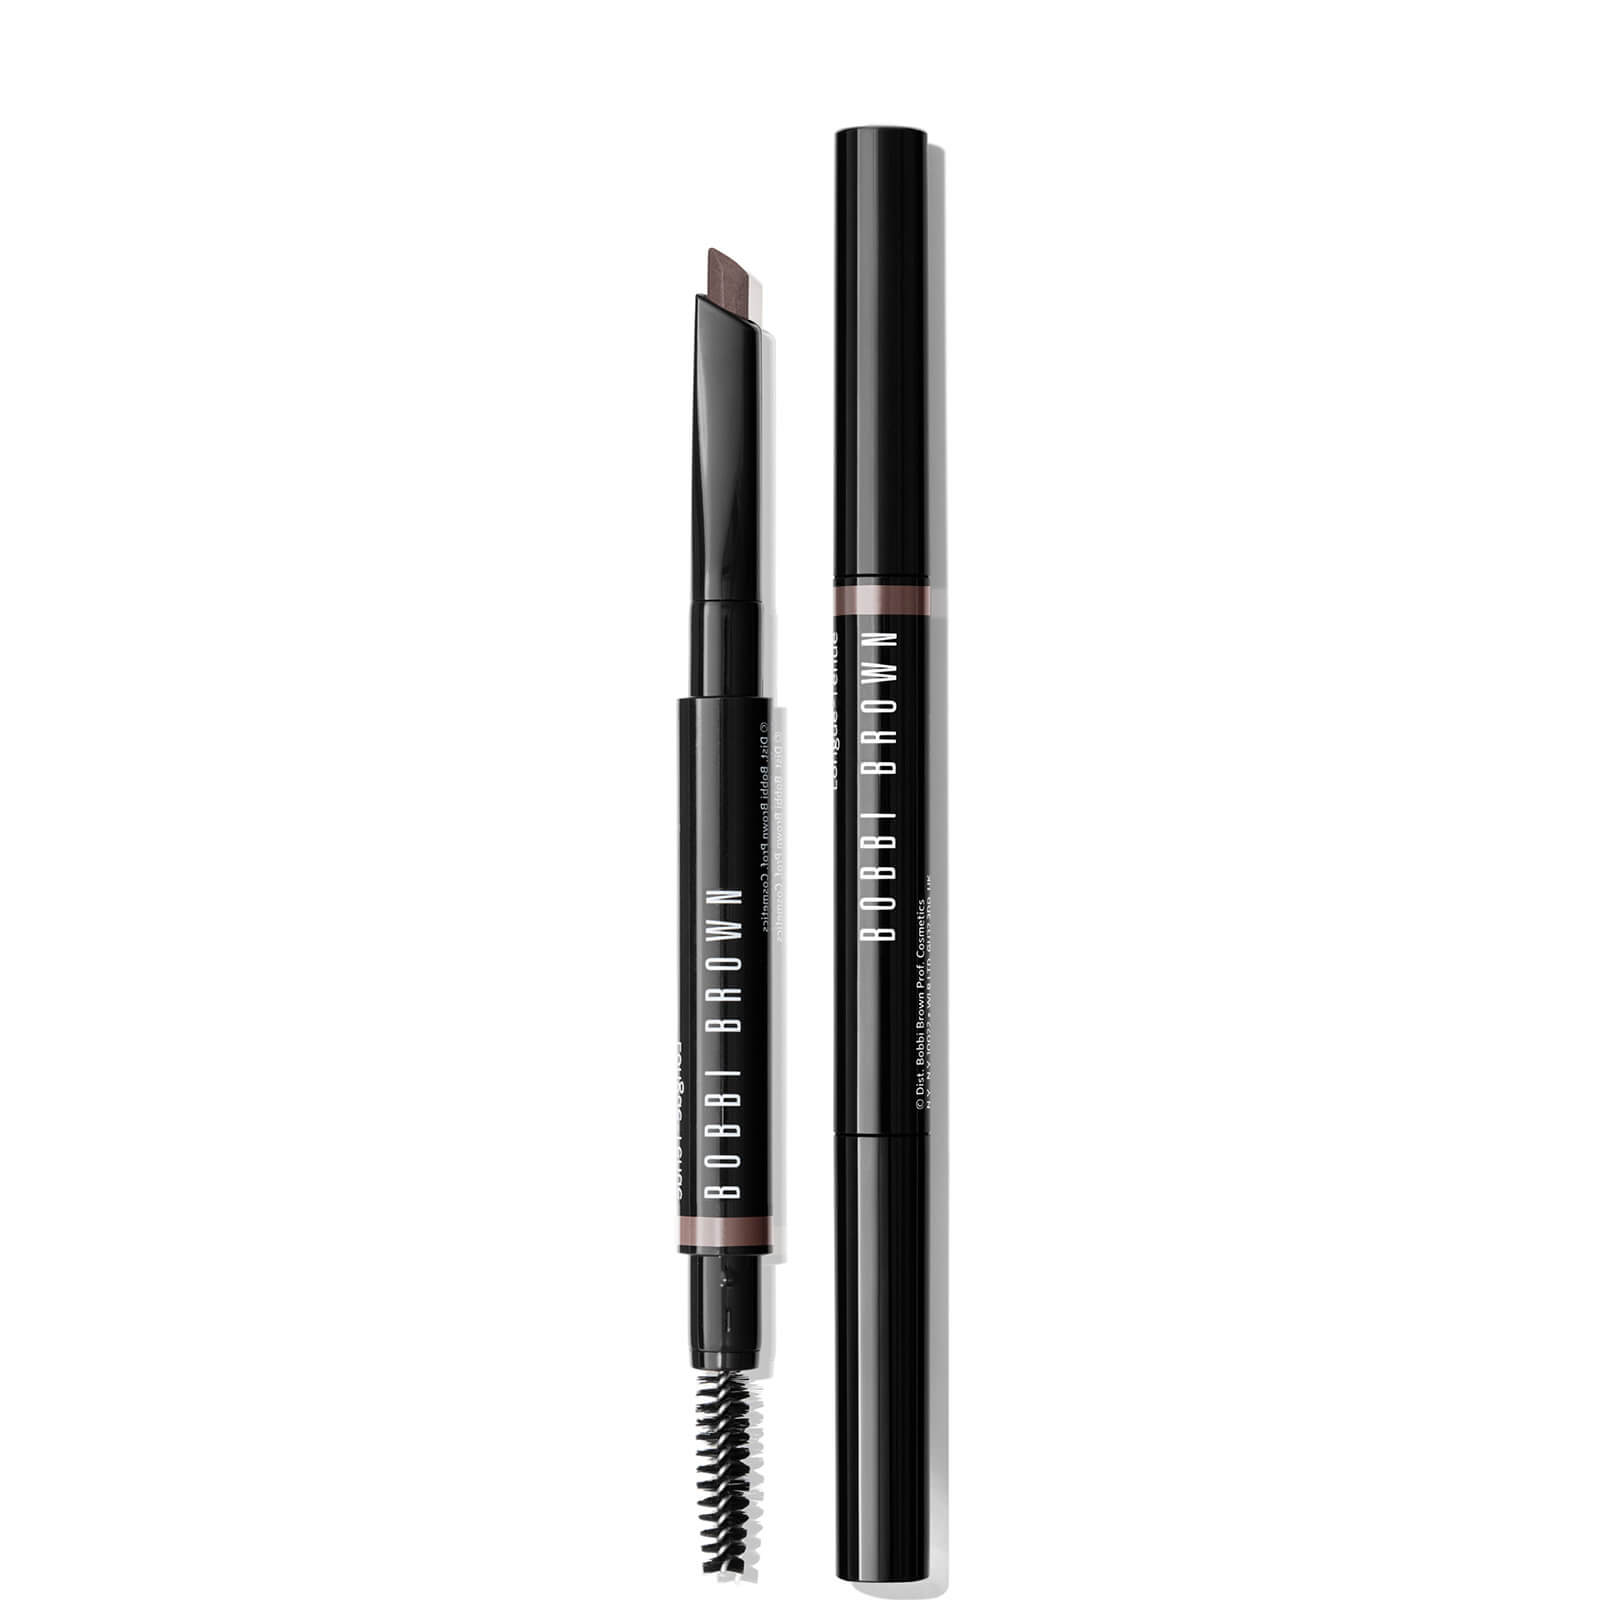 Bobbi Brown Perfectly Defined Long-Wear Brow Pencil 0.33g (Various Shades) - Neutral Brown